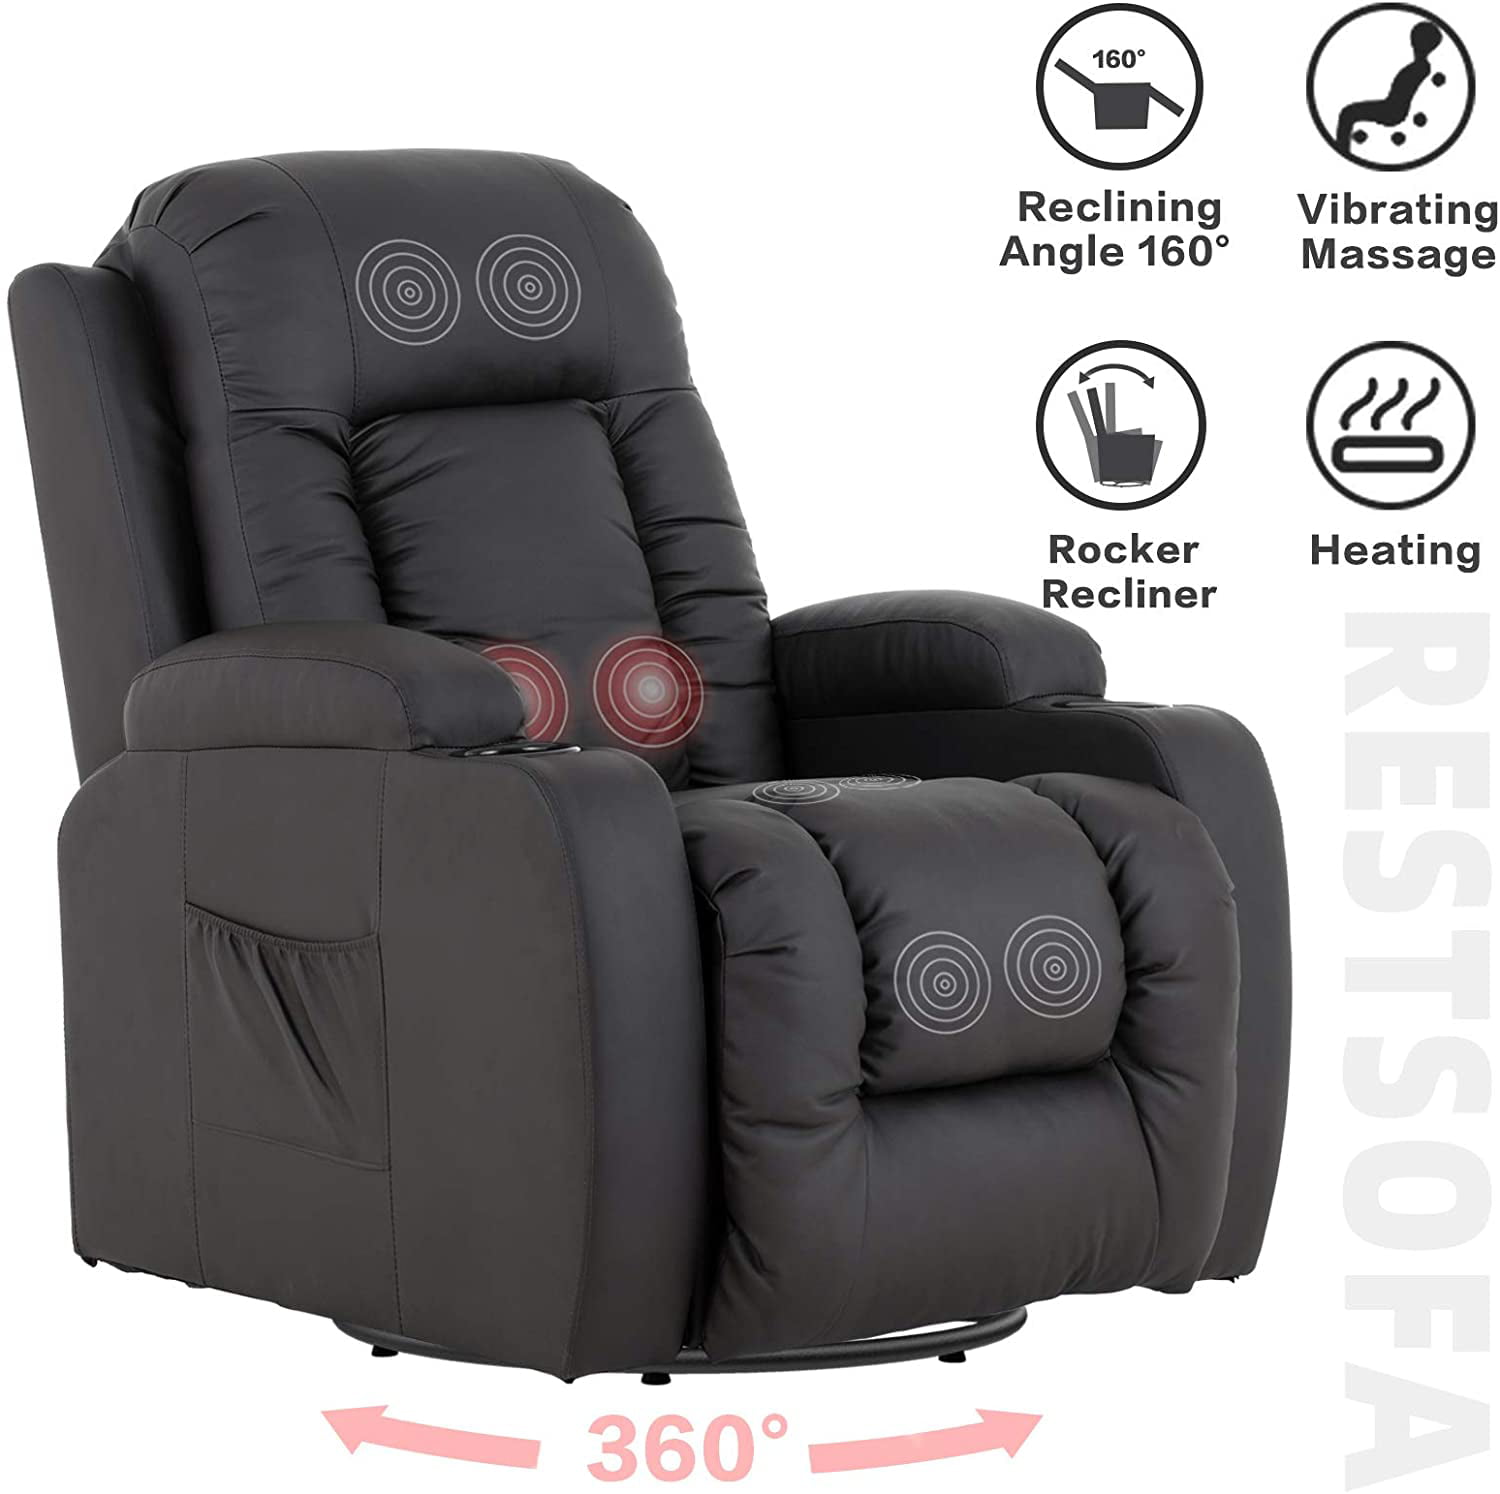 Mecor Massage Recliner Chair Pu Leather, Ergonomic Leather Recliner